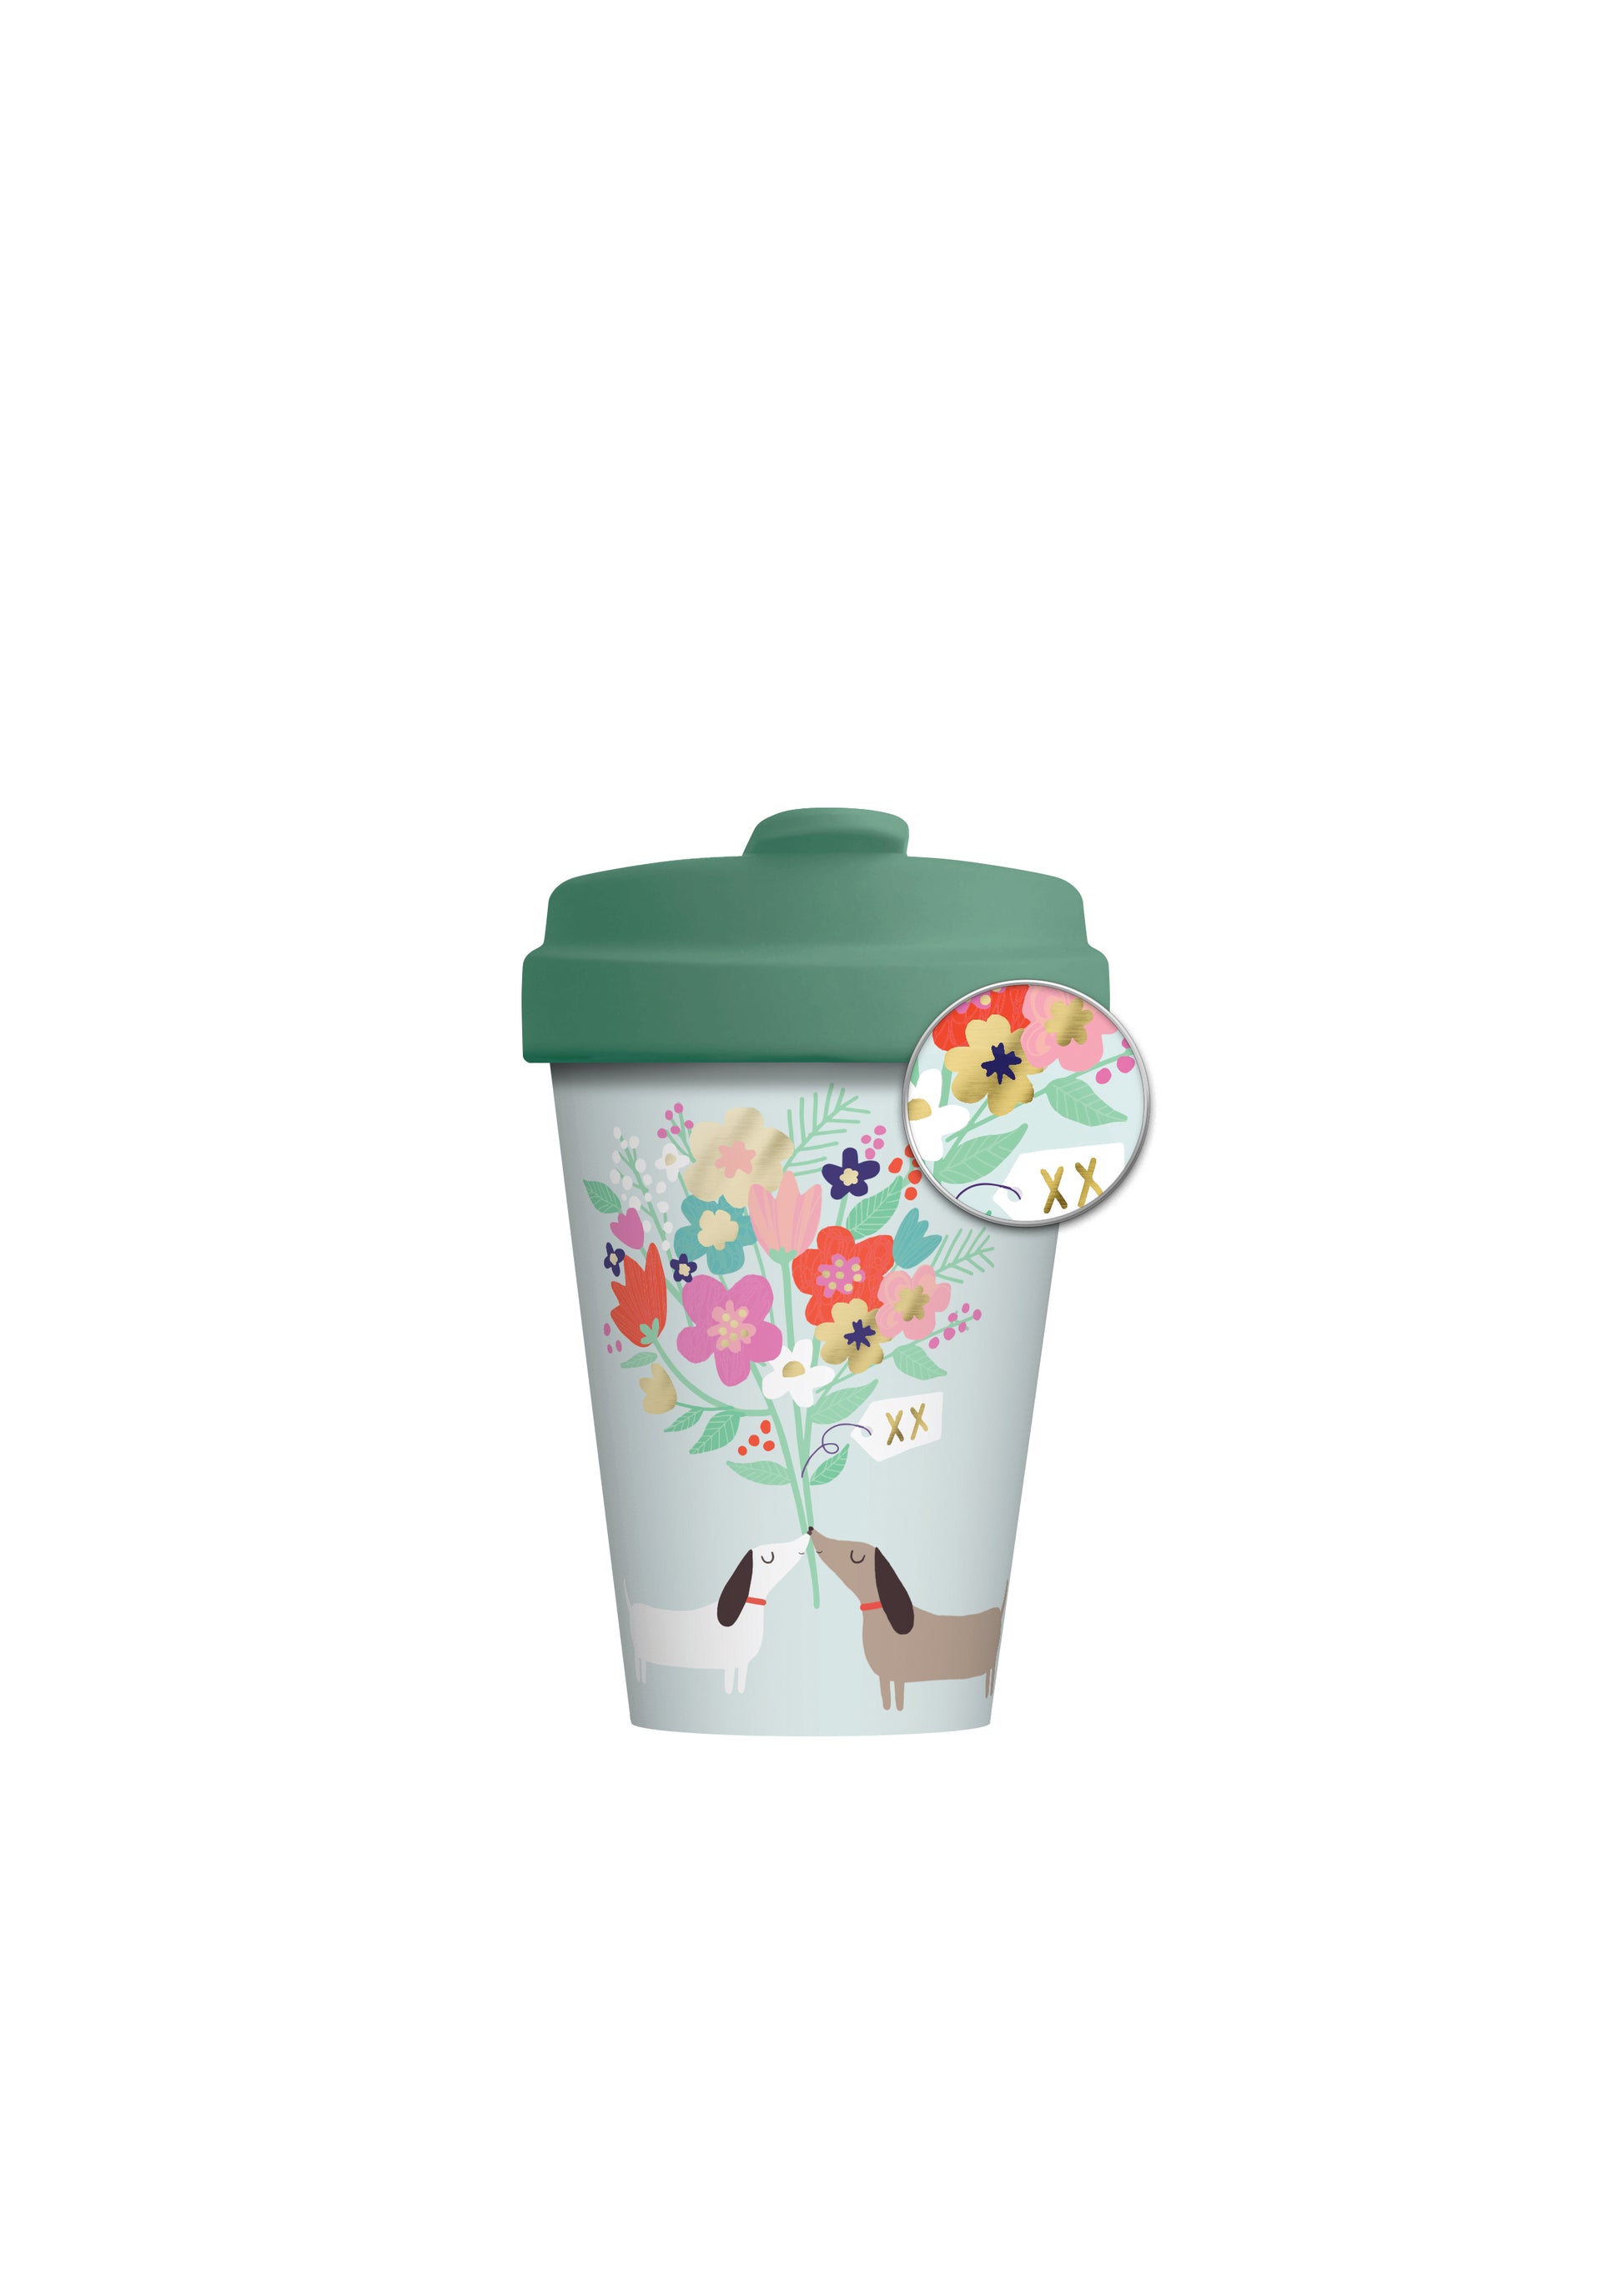 Lovely Doggies Bamboo Cup - Reusable, eco-friendly coffee bamboo cup - pale blue - green lid - kissing dogs with bouquet of flowers